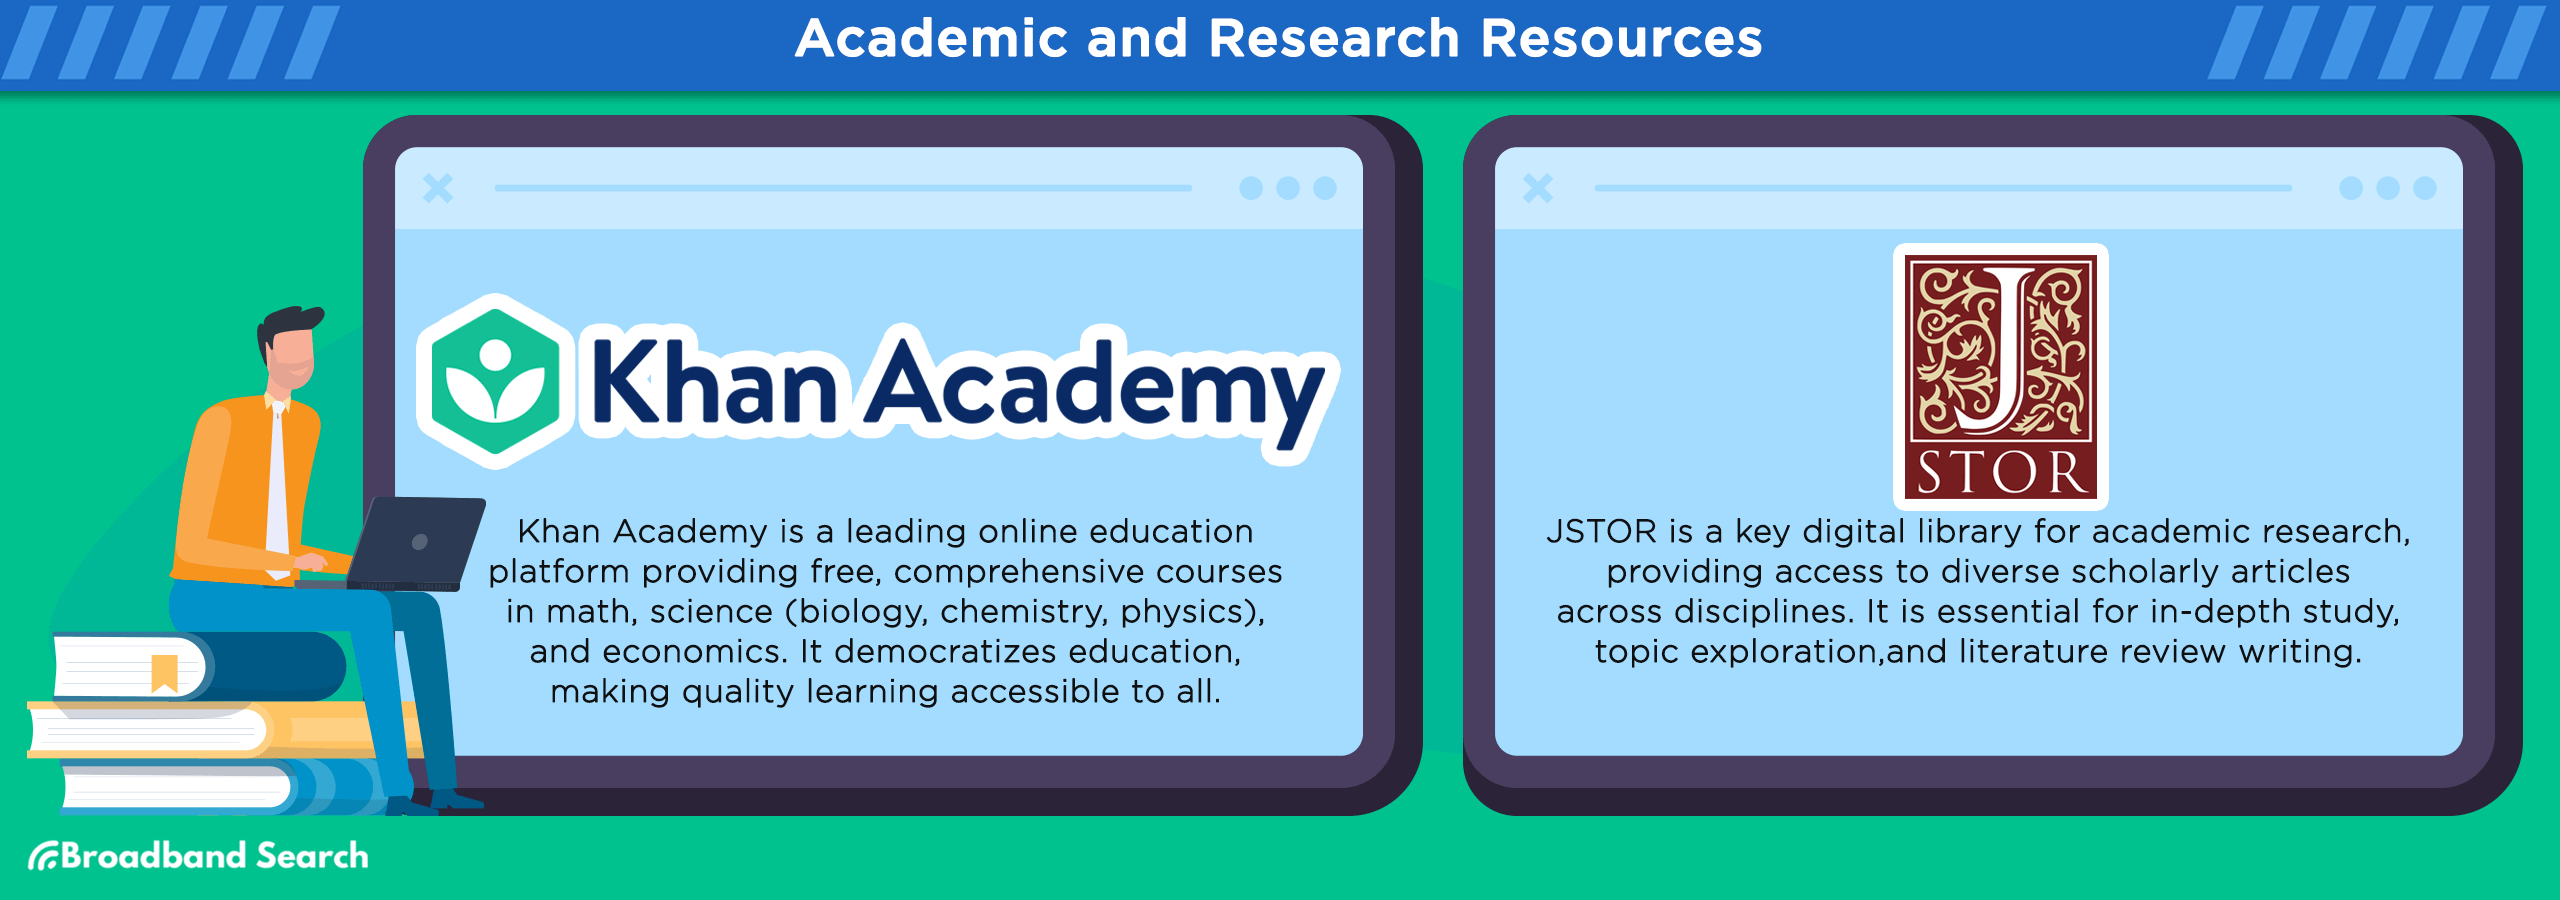 Academic and research resources